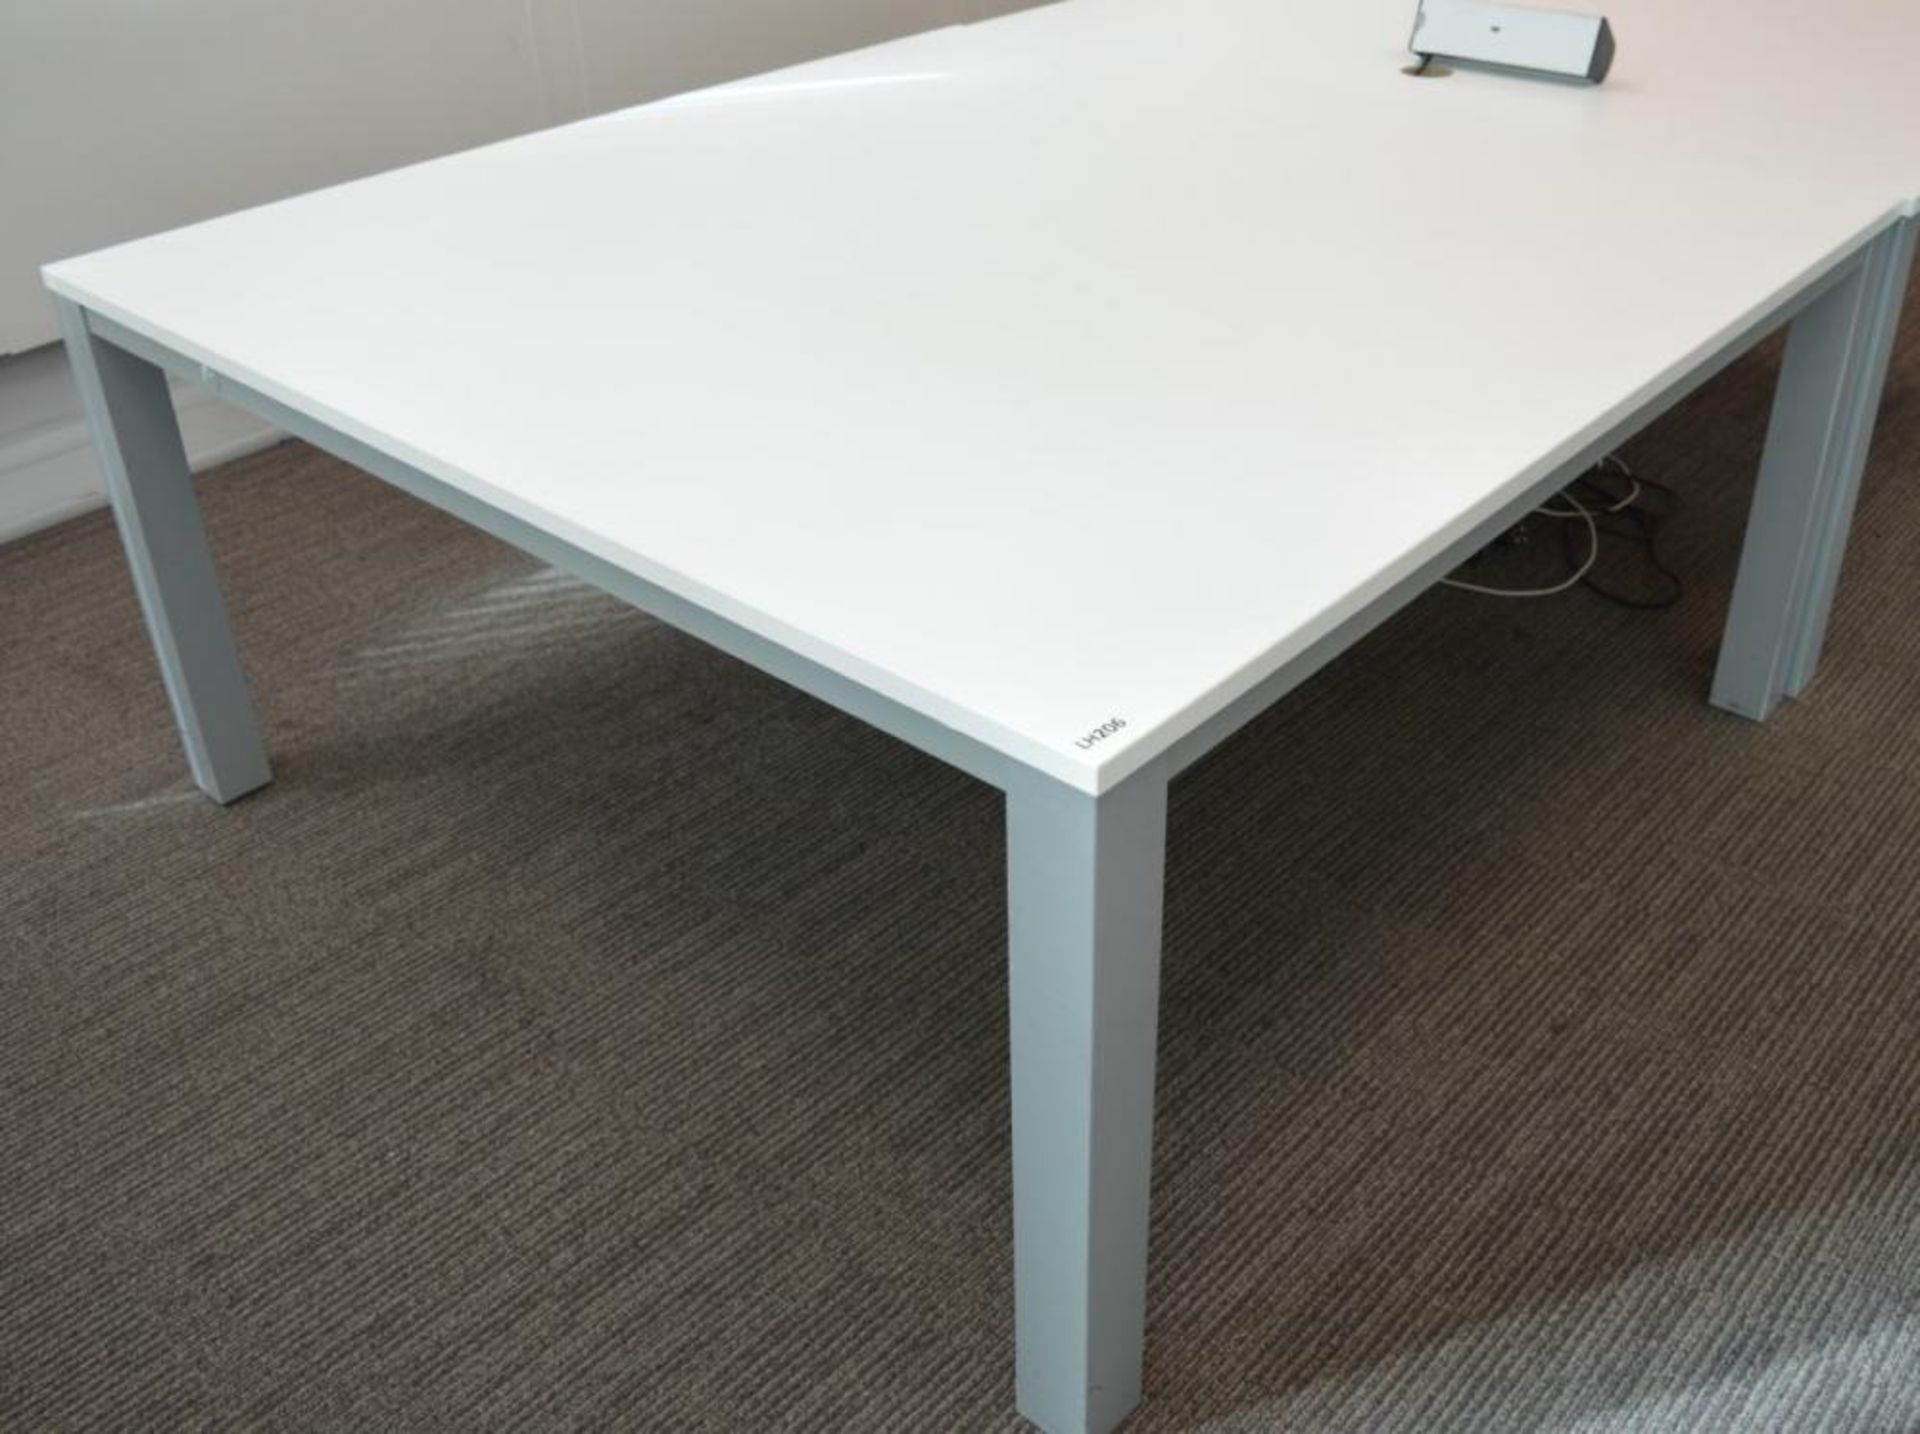 1 x Boardroom Meeting Table Finished With White Surface and Grey Metal Frame - H74 x L160 x W160 - Bild 4 aus 4